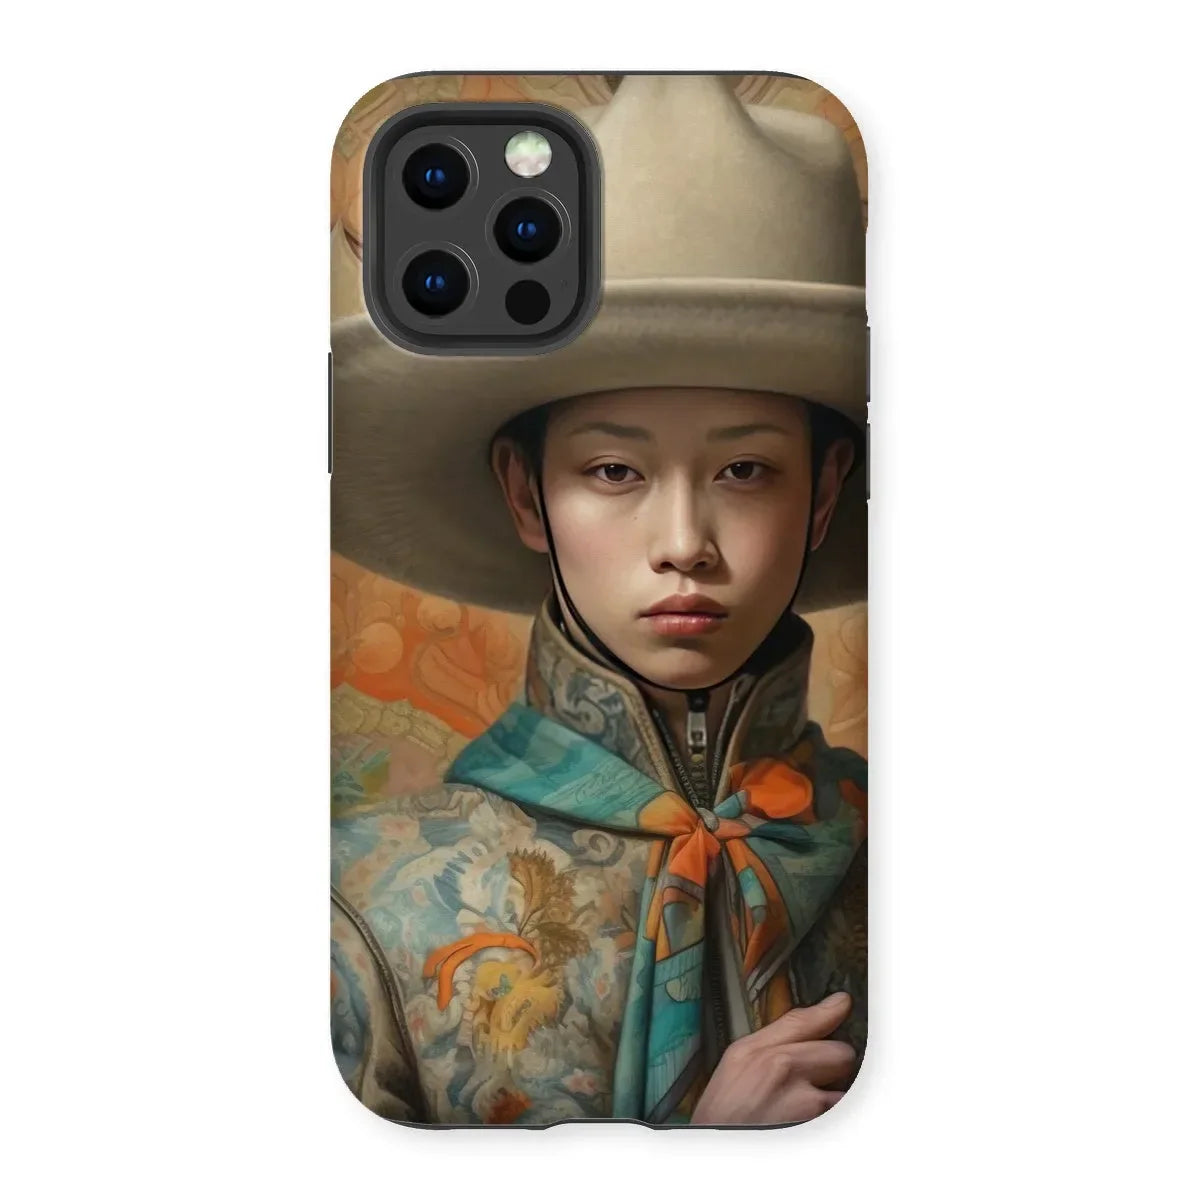 Xiang - Gaysian Chinese Cowboy Aesthetic Art Phone Case - Iphone 12 Pro / Matte - Mobile Phone Cases - Aesthetic Art